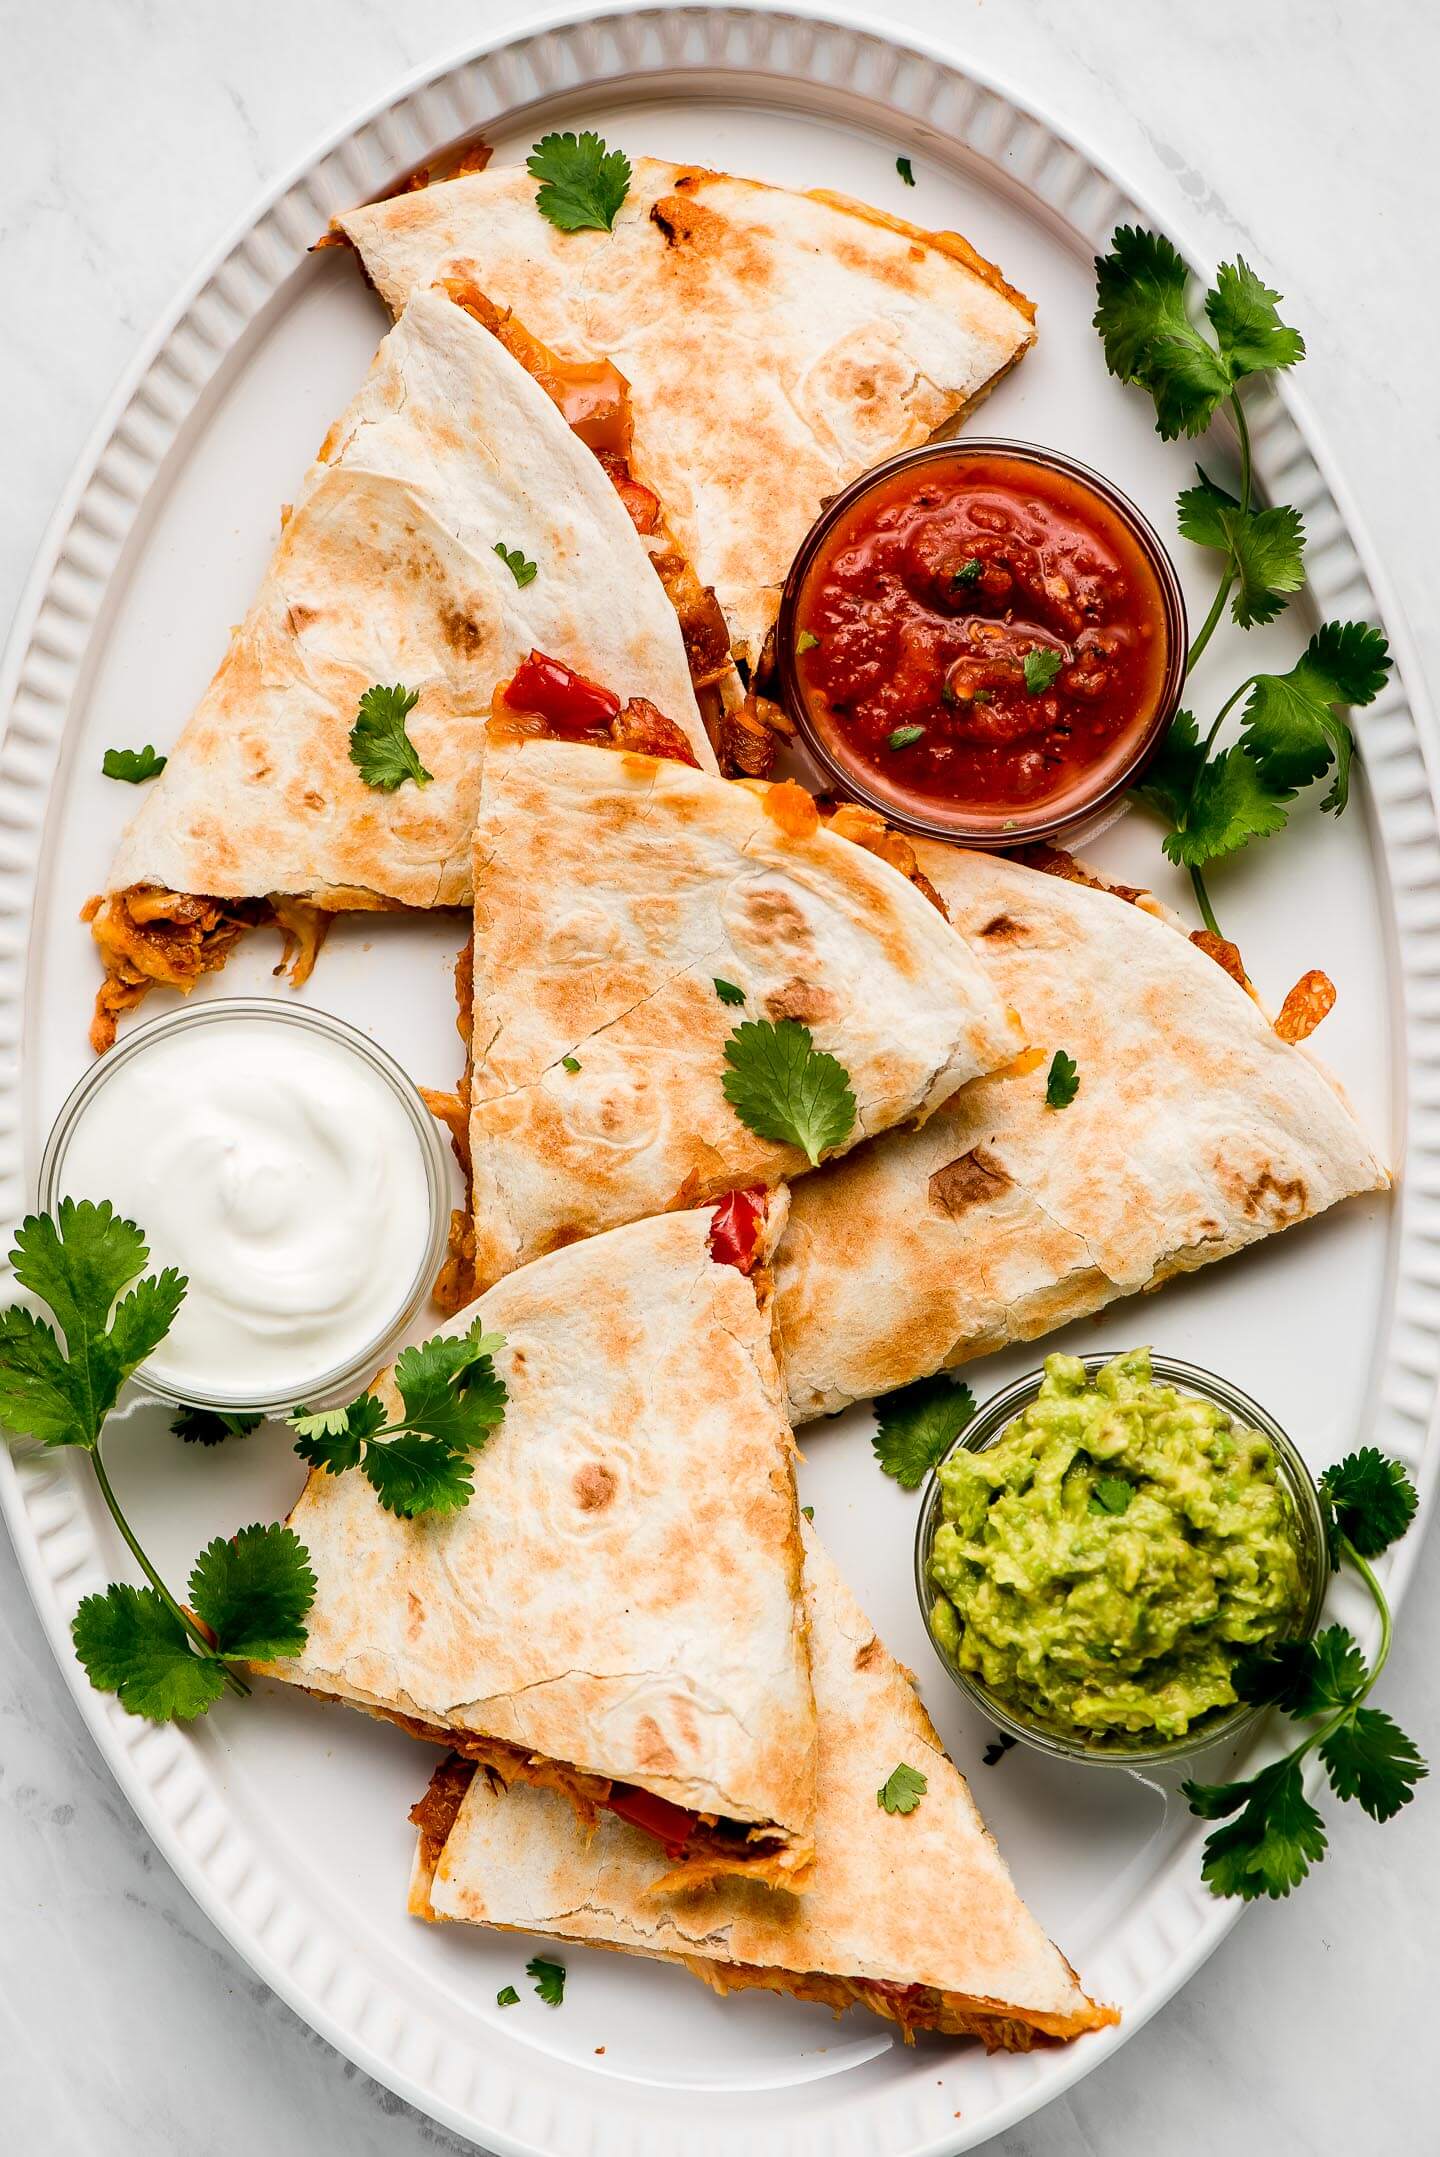 Triangles of quesadillas on a large platter with salsa, sour cream, guacamole, and cilantro.